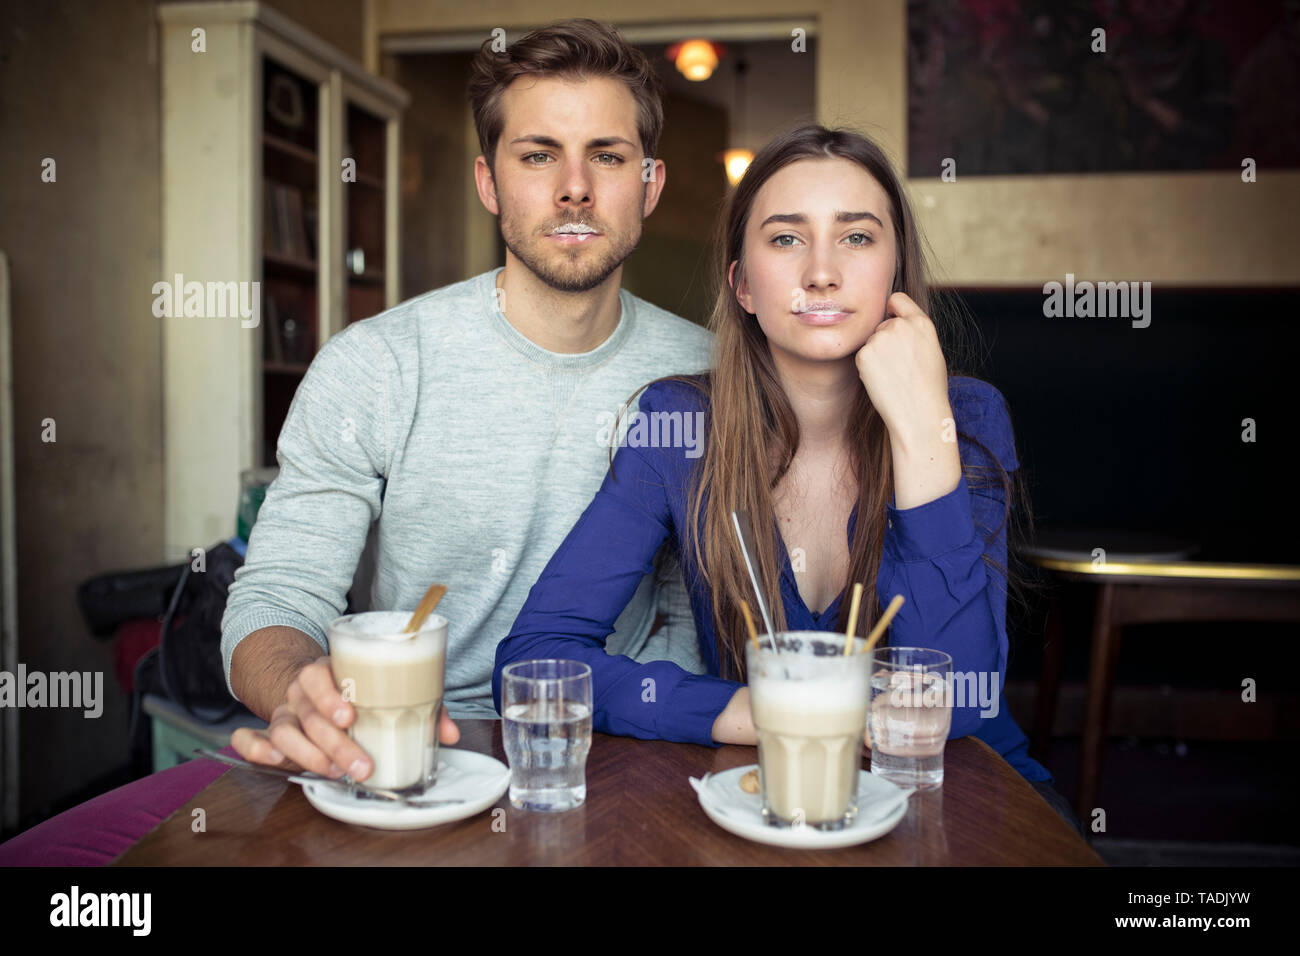 Portrait of young couple in a cafe with milk froth on lips Stock Photo